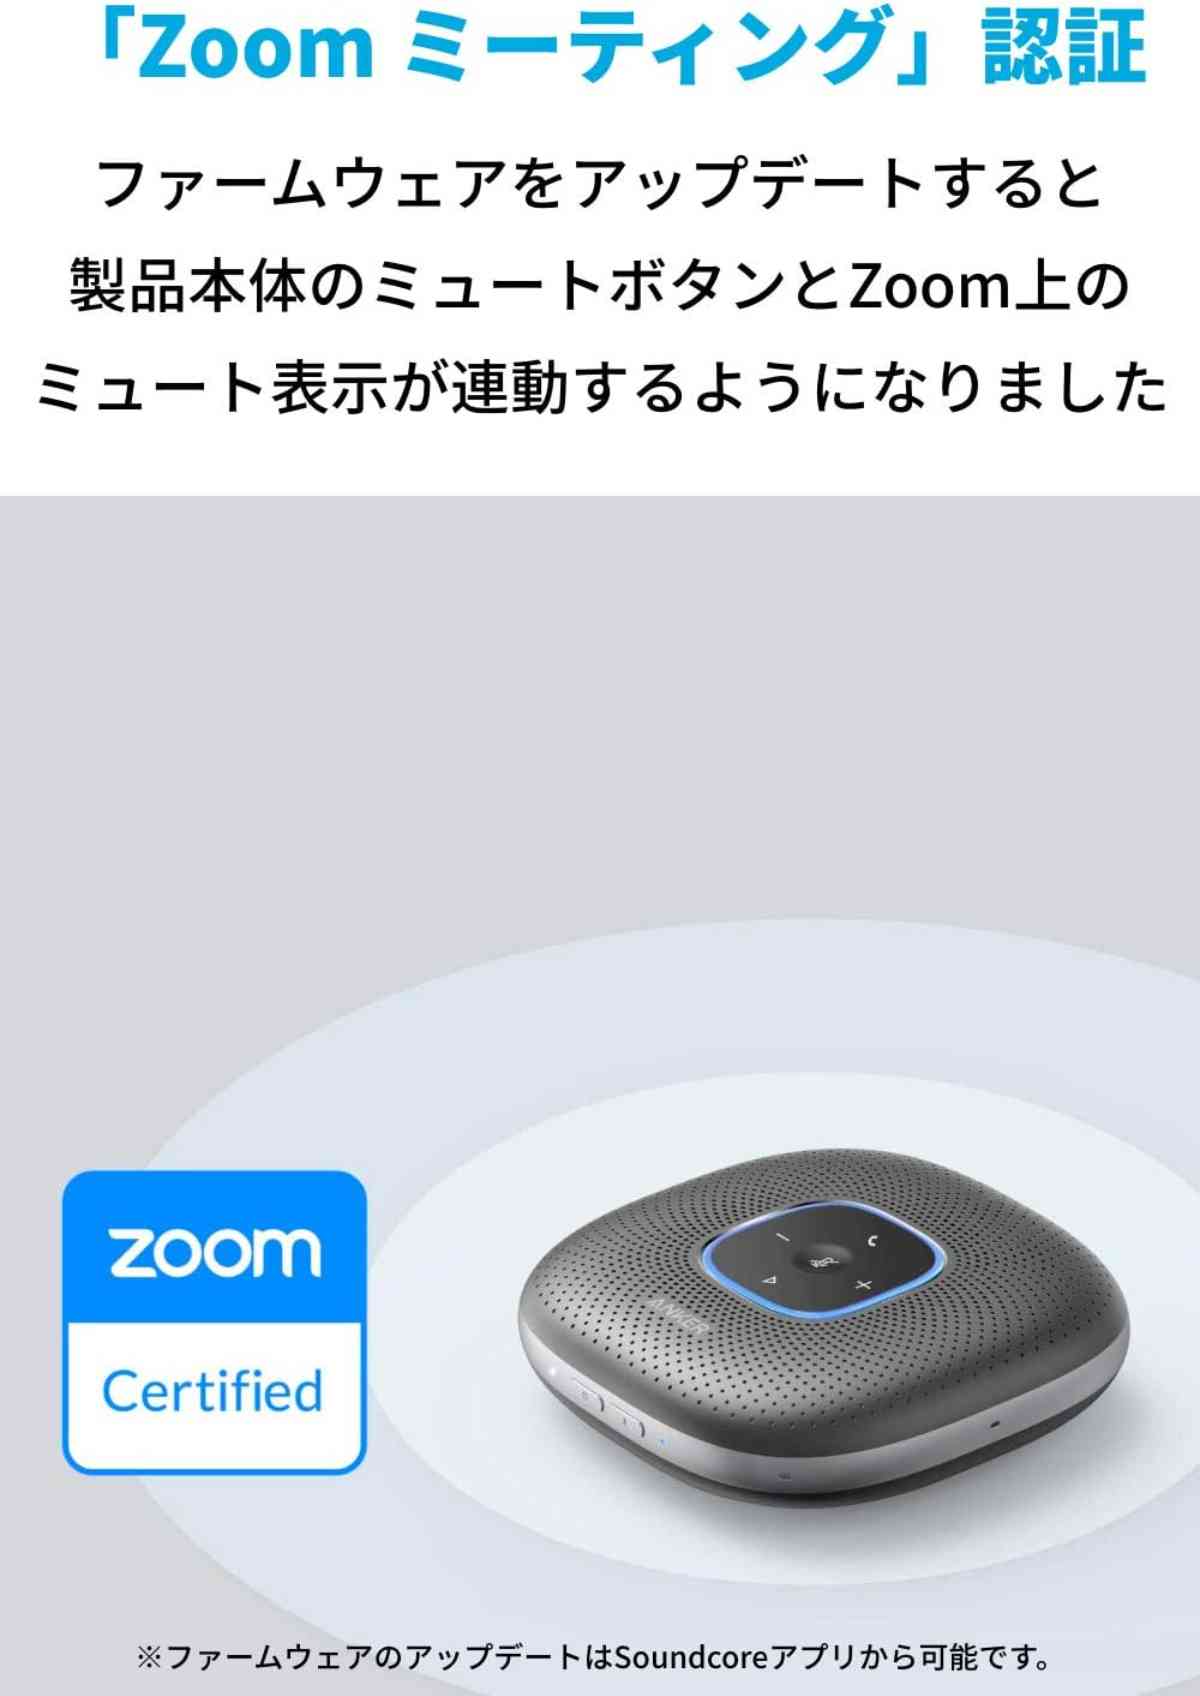 Zoom用でさらに使いやすい「Anker PowerConf」